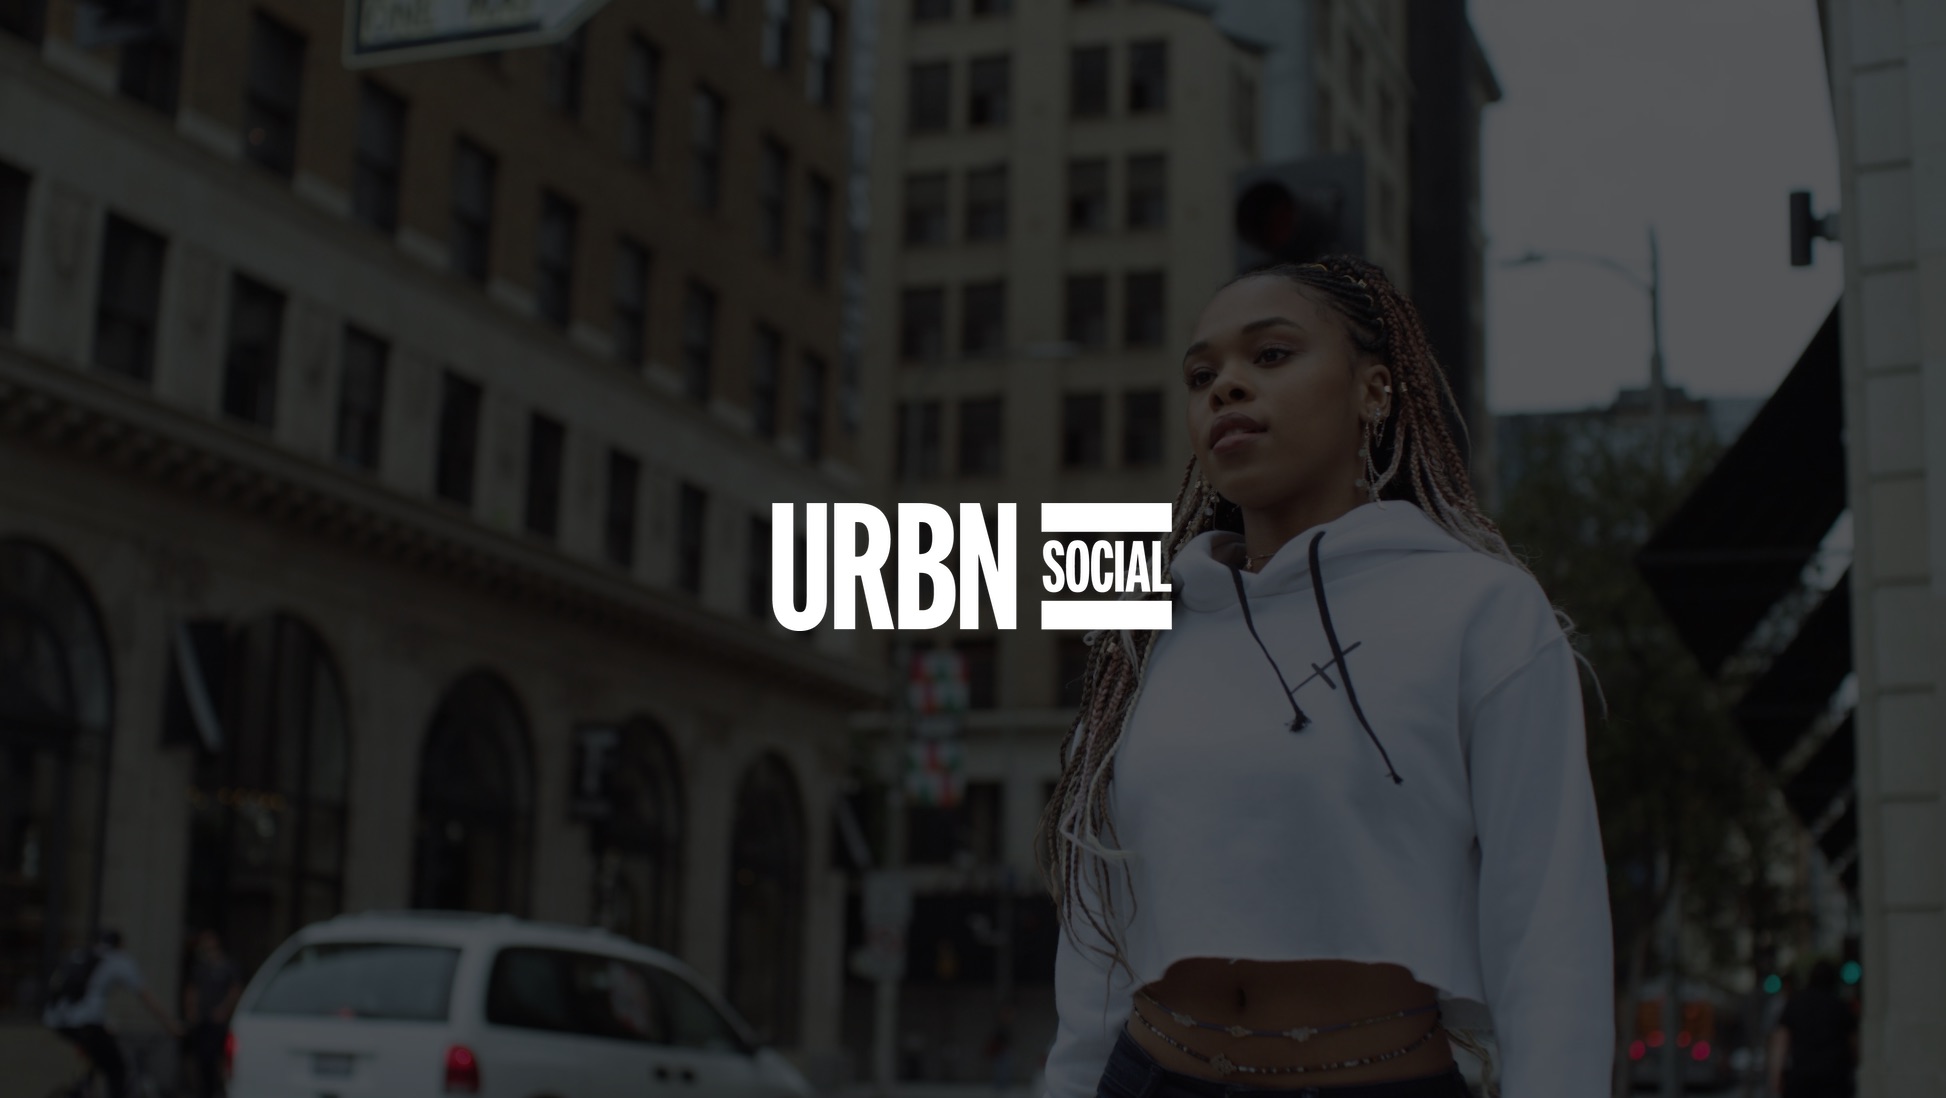 White URBN Social logo on dimmed background of woman wearing a white Uncreative sweatshirt top looking off to the side